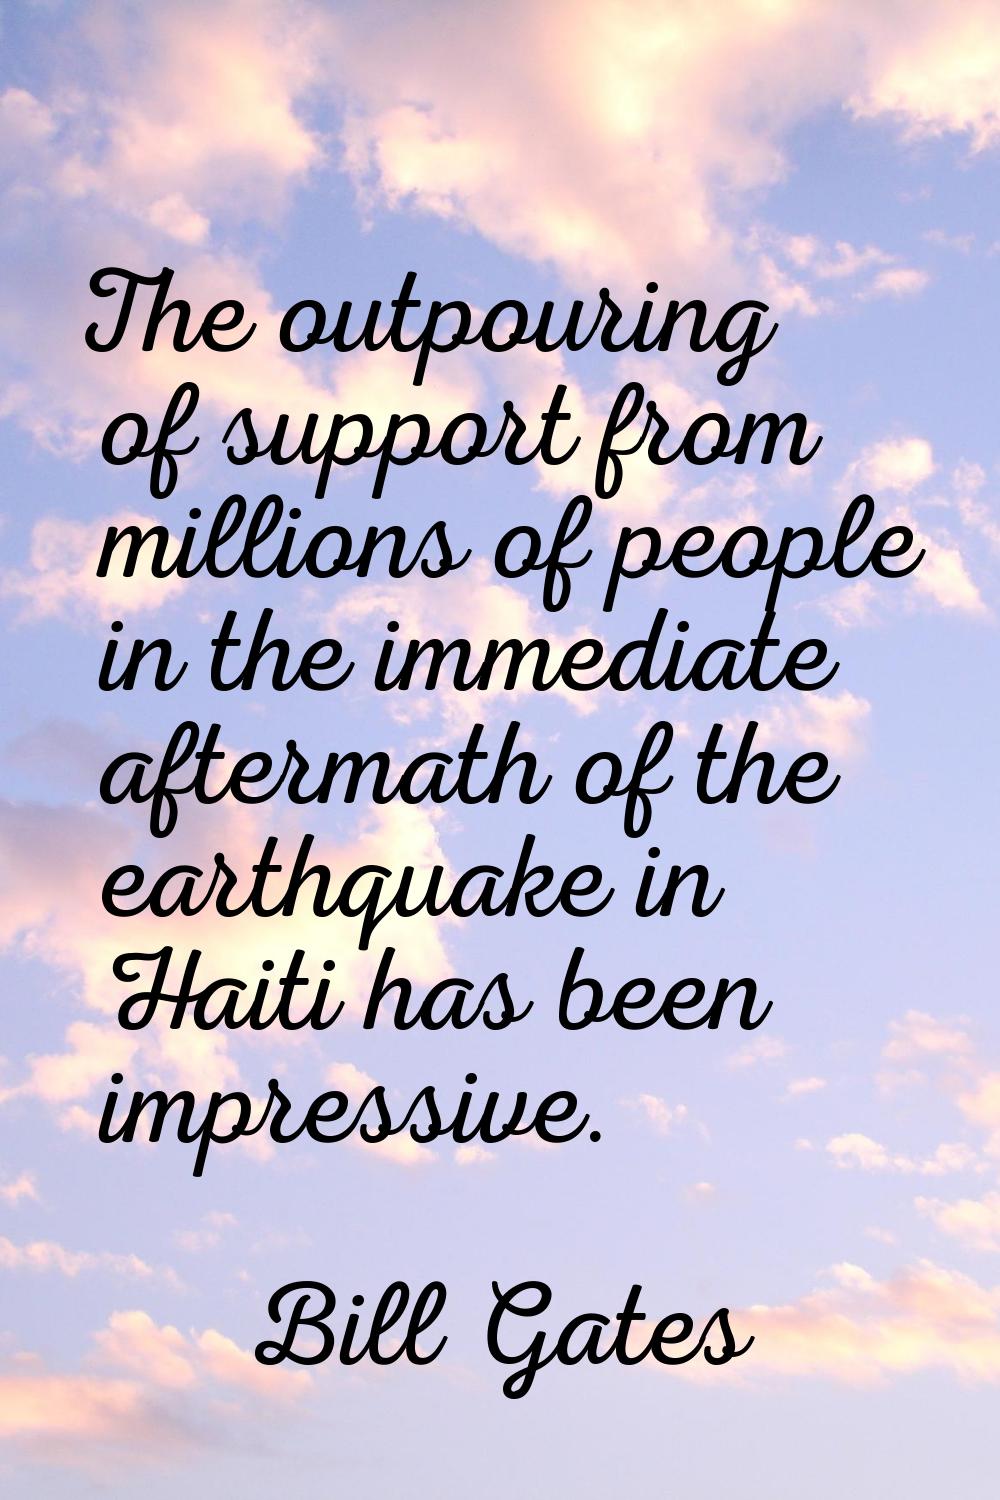 The outpouring of support from millions of people in the immediate aftermath of the earthquake in H